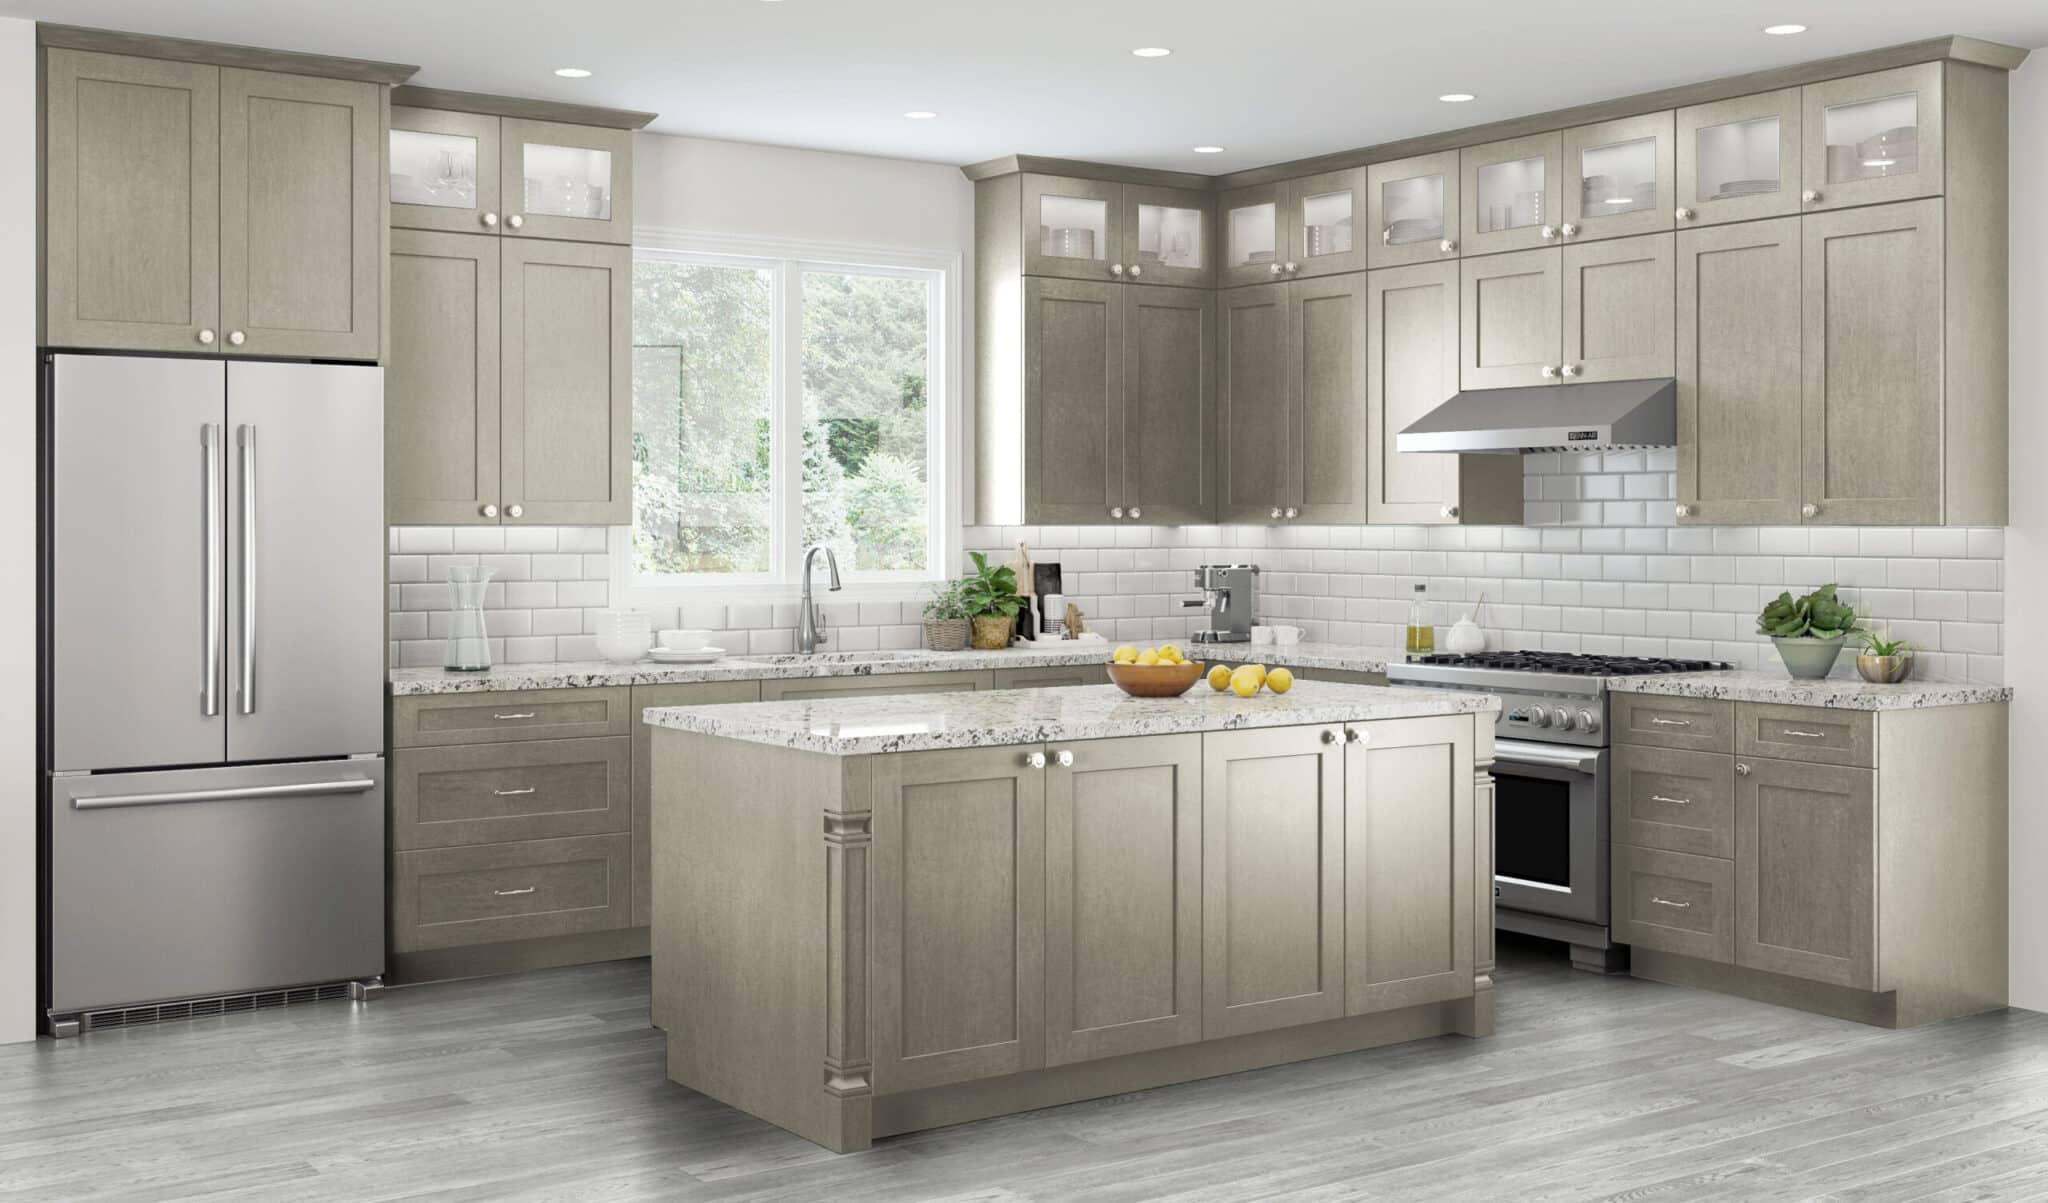 CNC Beige kitchen cabinets with grey countertop